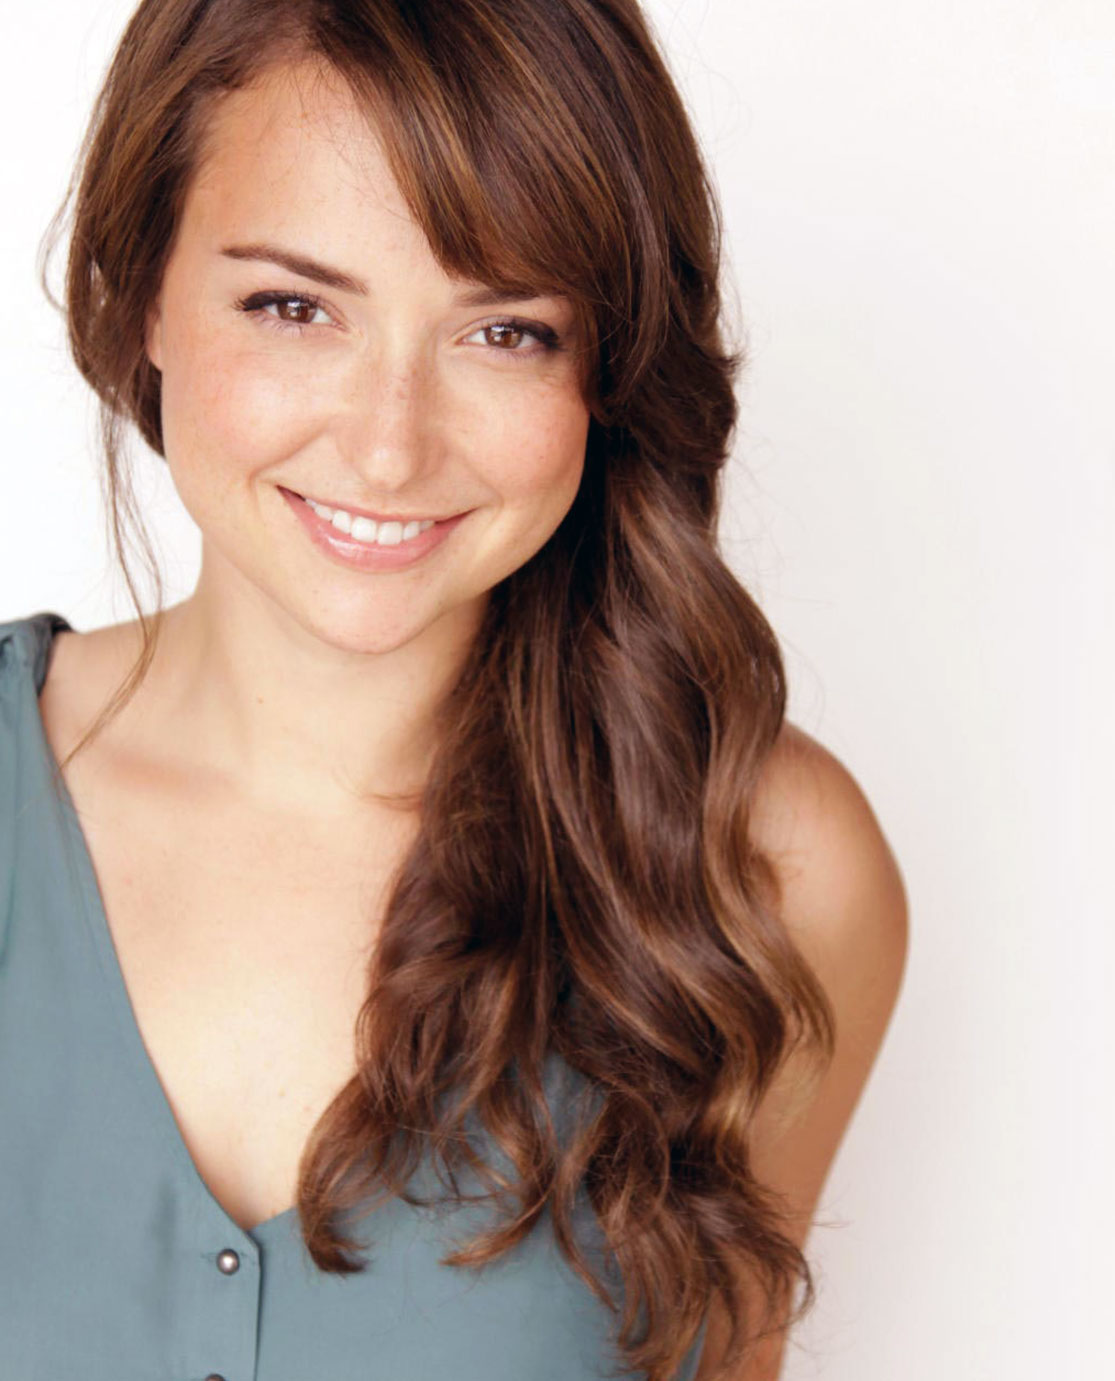 Milana Vayntrub nude leaked sexy topless hot naked cleavage17